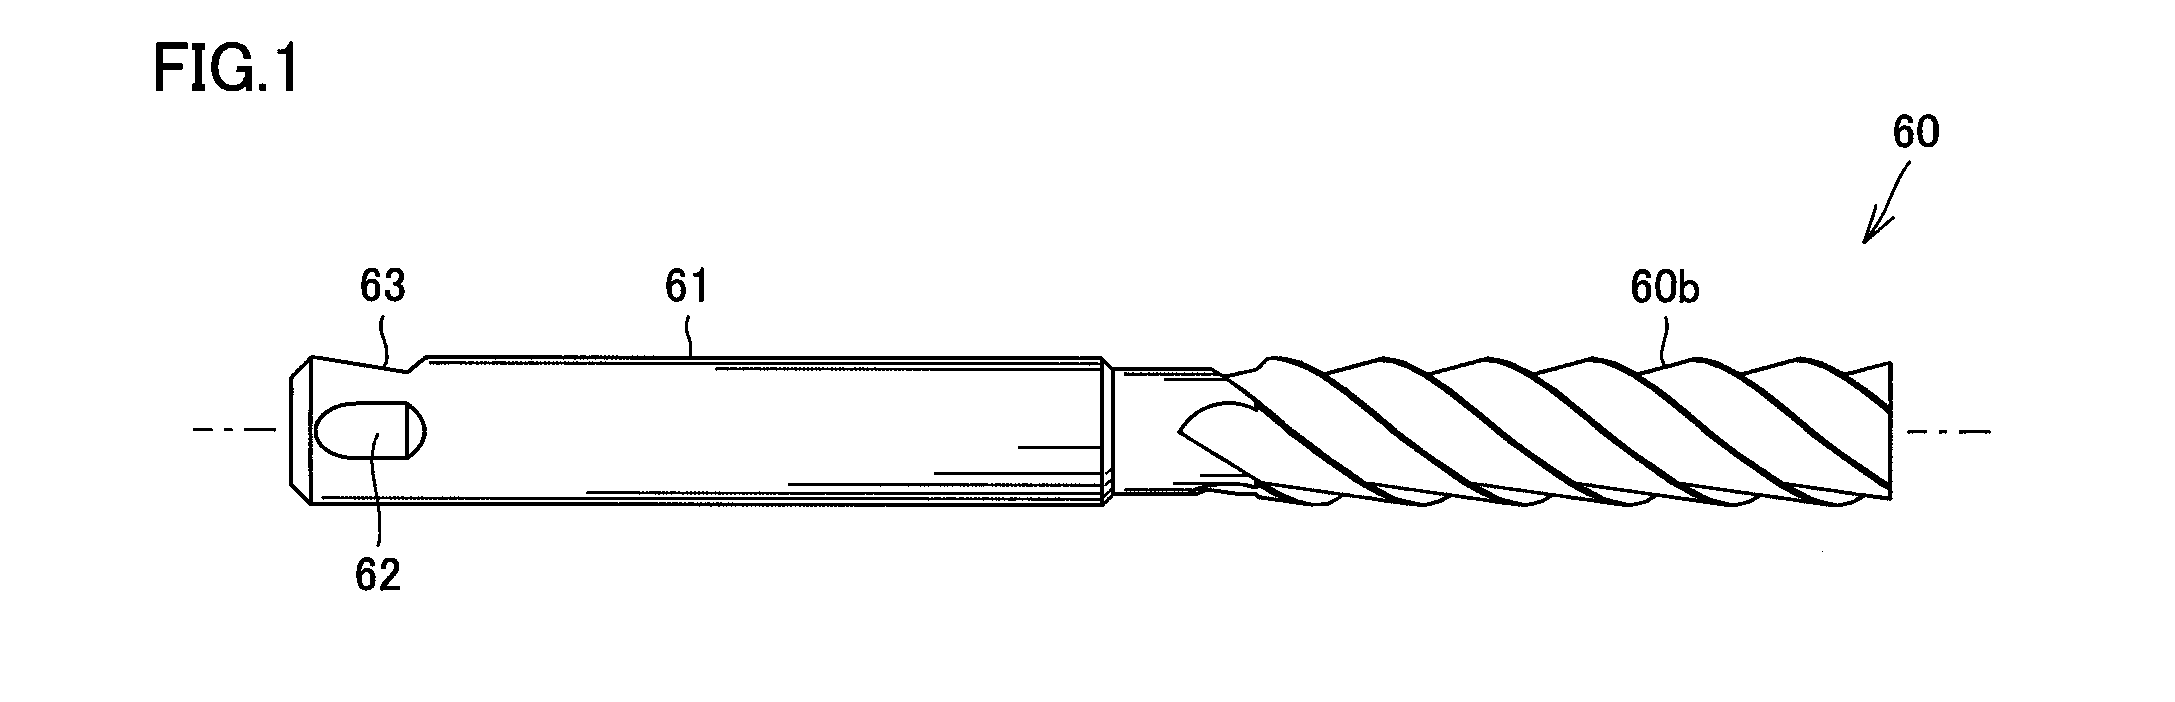 Shank Structure of End Mill and Tool Holder